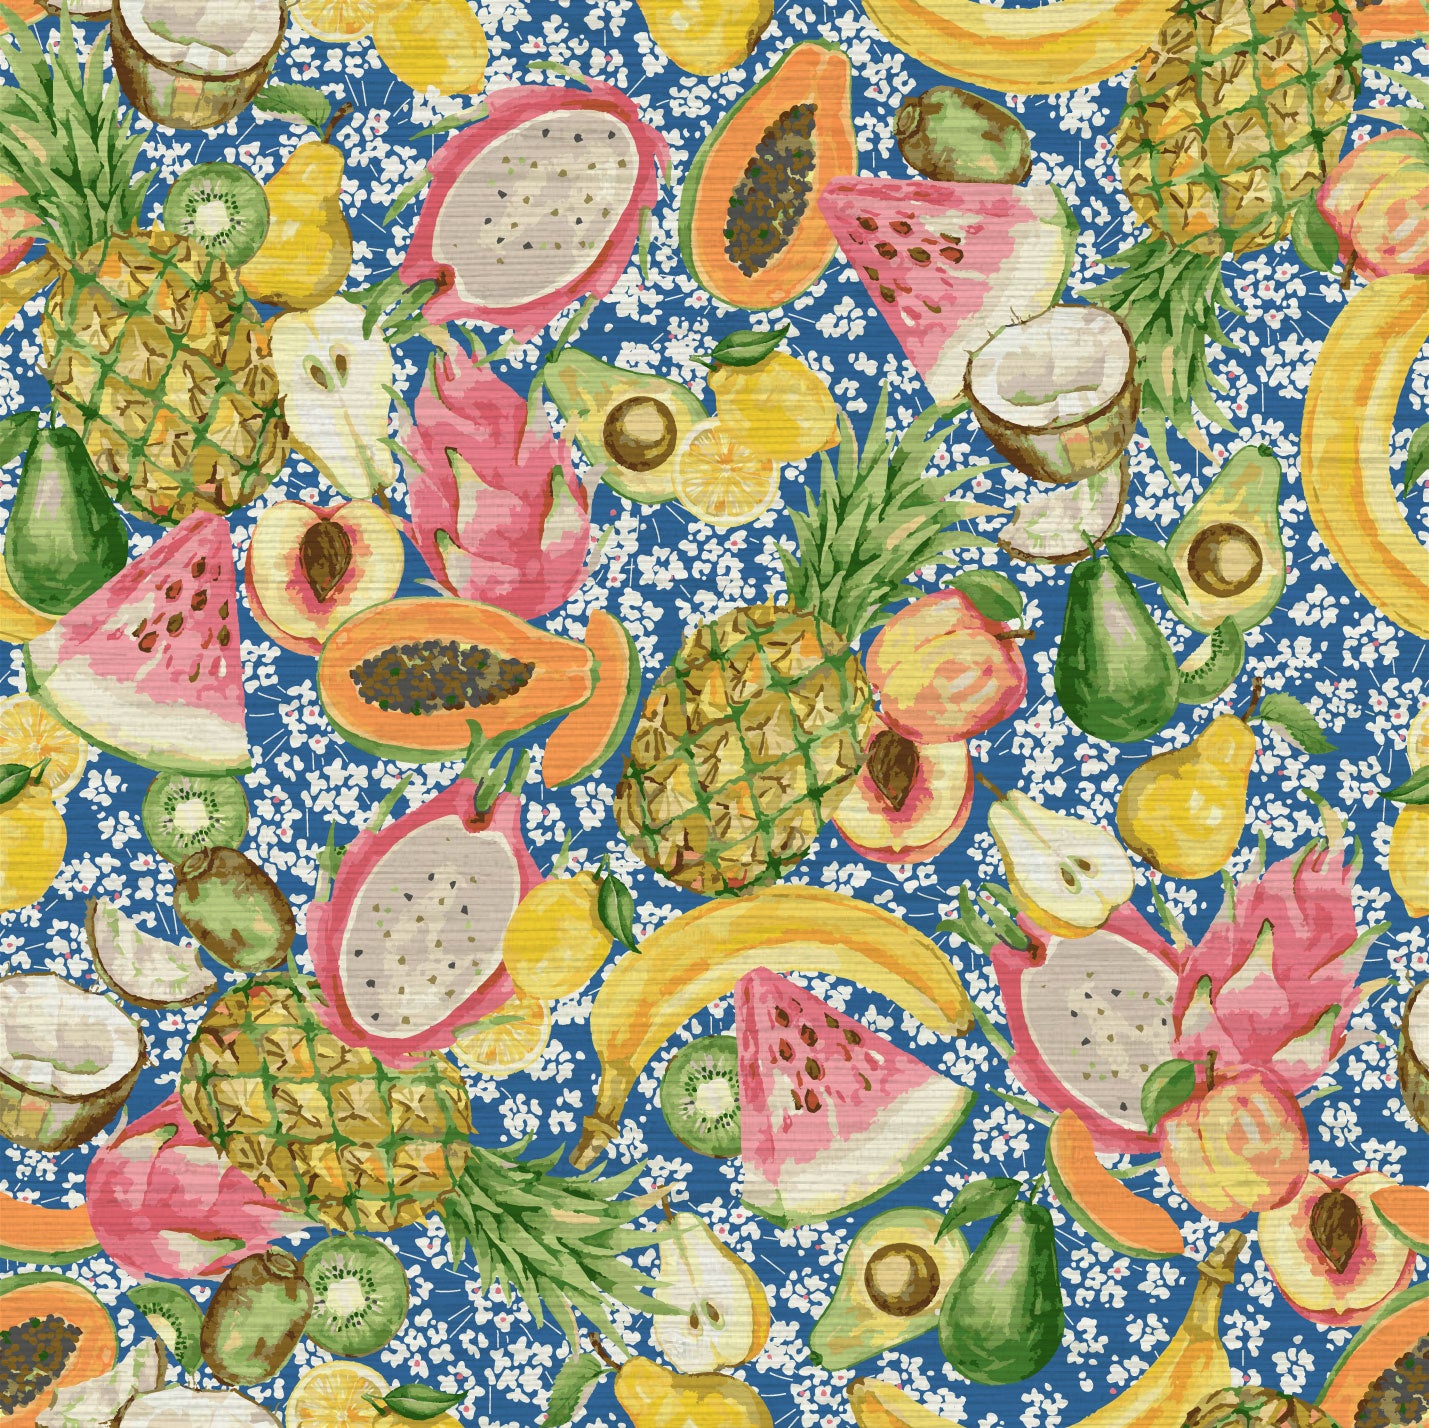 grasscloth wallpaper hand painted with watercolors, blue based print with white ditsy florals with tossed fruit layered on top including: pineapples, limes, bananas, avocados, lemons, pears, peaches, watermelon, coconuts, mangos, bananas passion fruit Natural Textured Eco-Friendly Non-toxic High-quality  Sustainable practices Sustainability Interior Design Wall covering Bold tropical retro chic garden